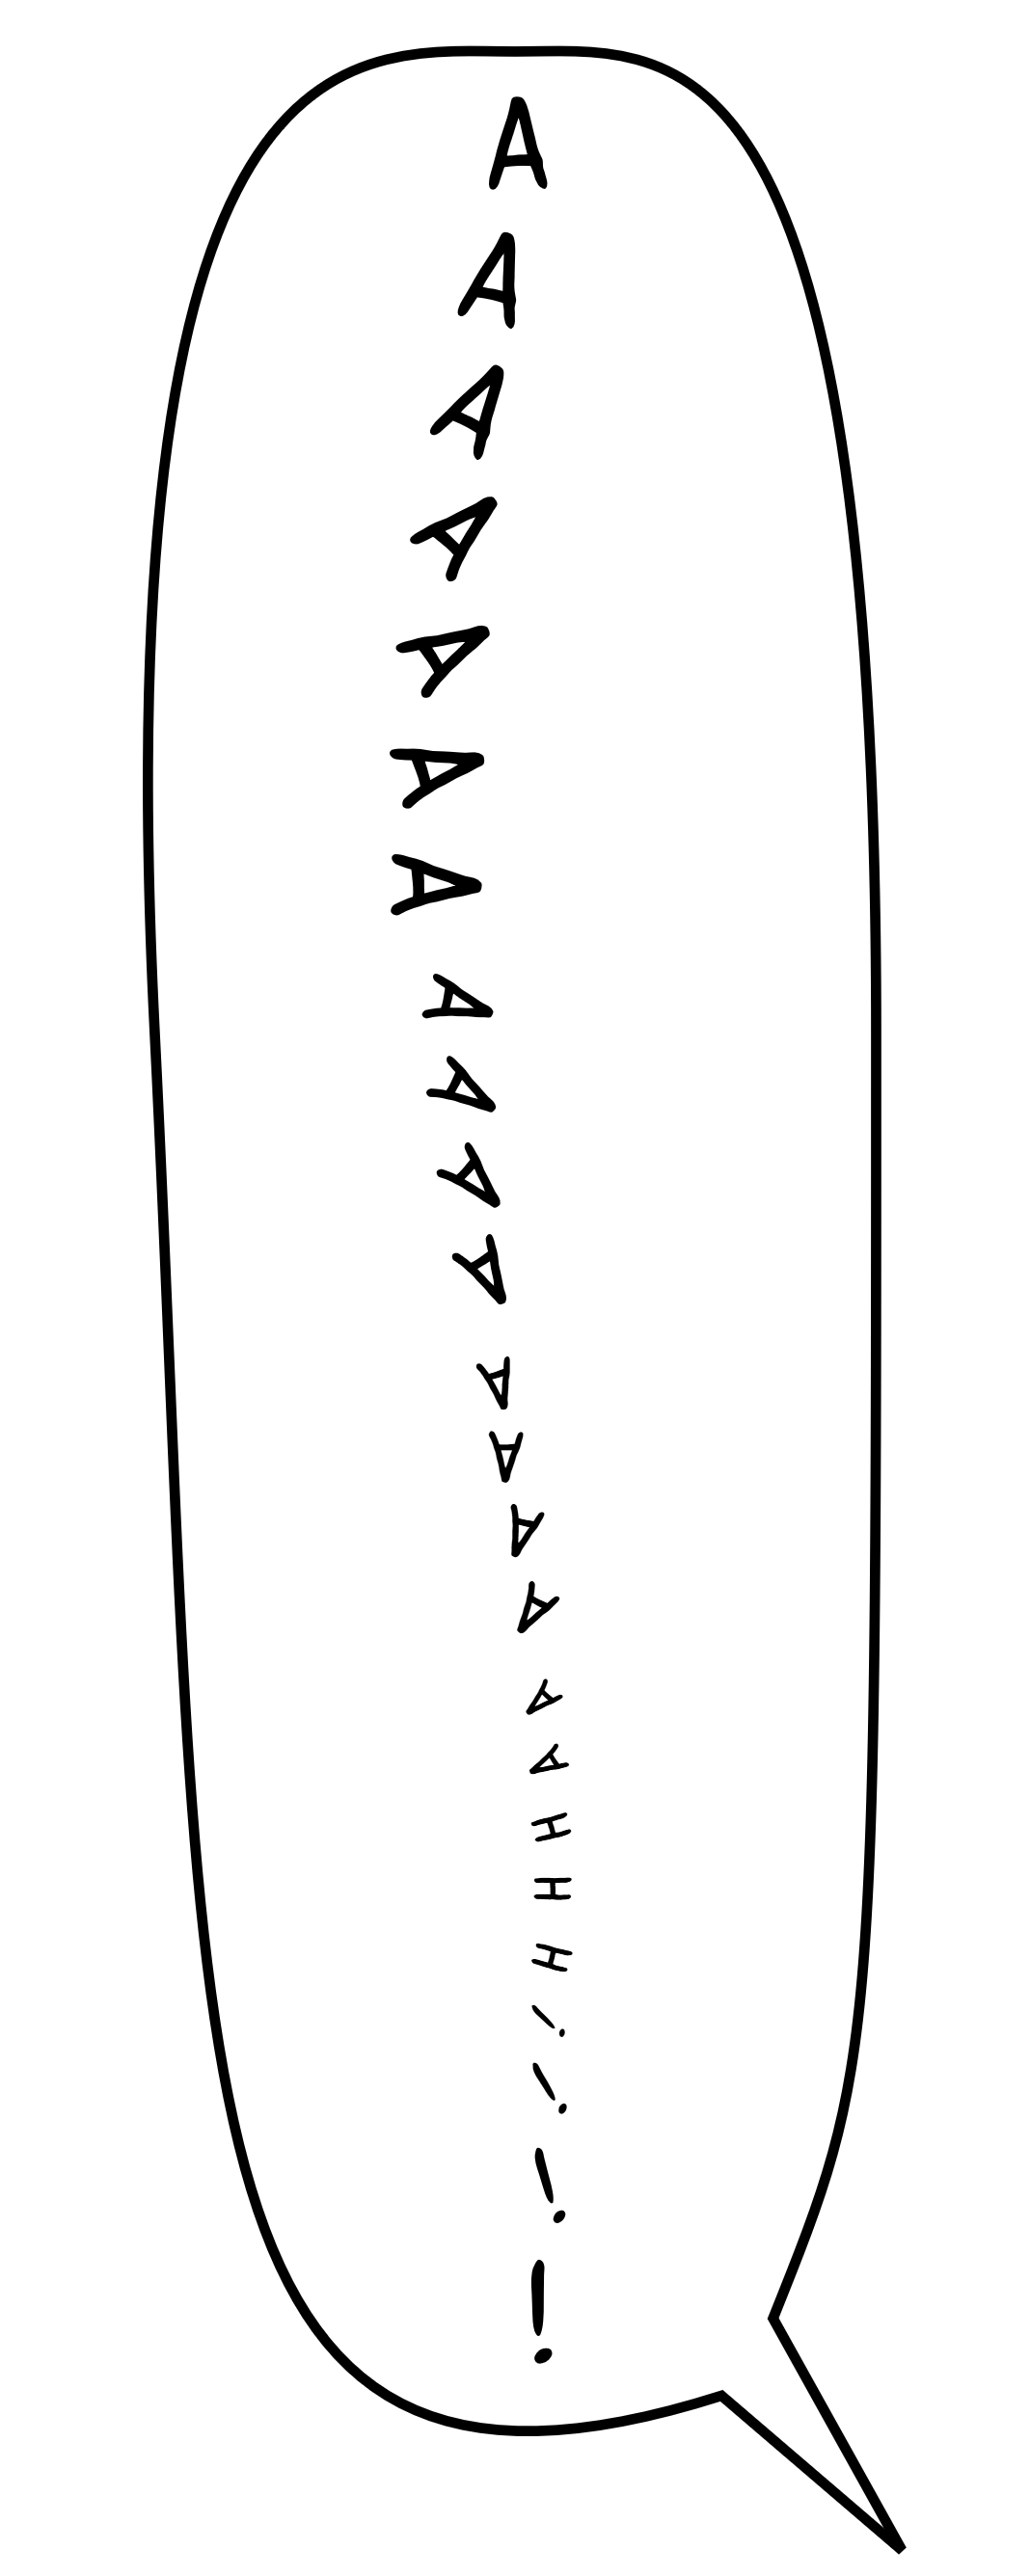 A tall vertical comic book speech bubble. The text 'Aaaaaaaaaaaaaaaaahhh!!!!' is written from top to bottom, letters successively twisting around sideways, upside-down, then back upright again. Letters also get smaller as it goes, with the final exclamation points each getting larger again.